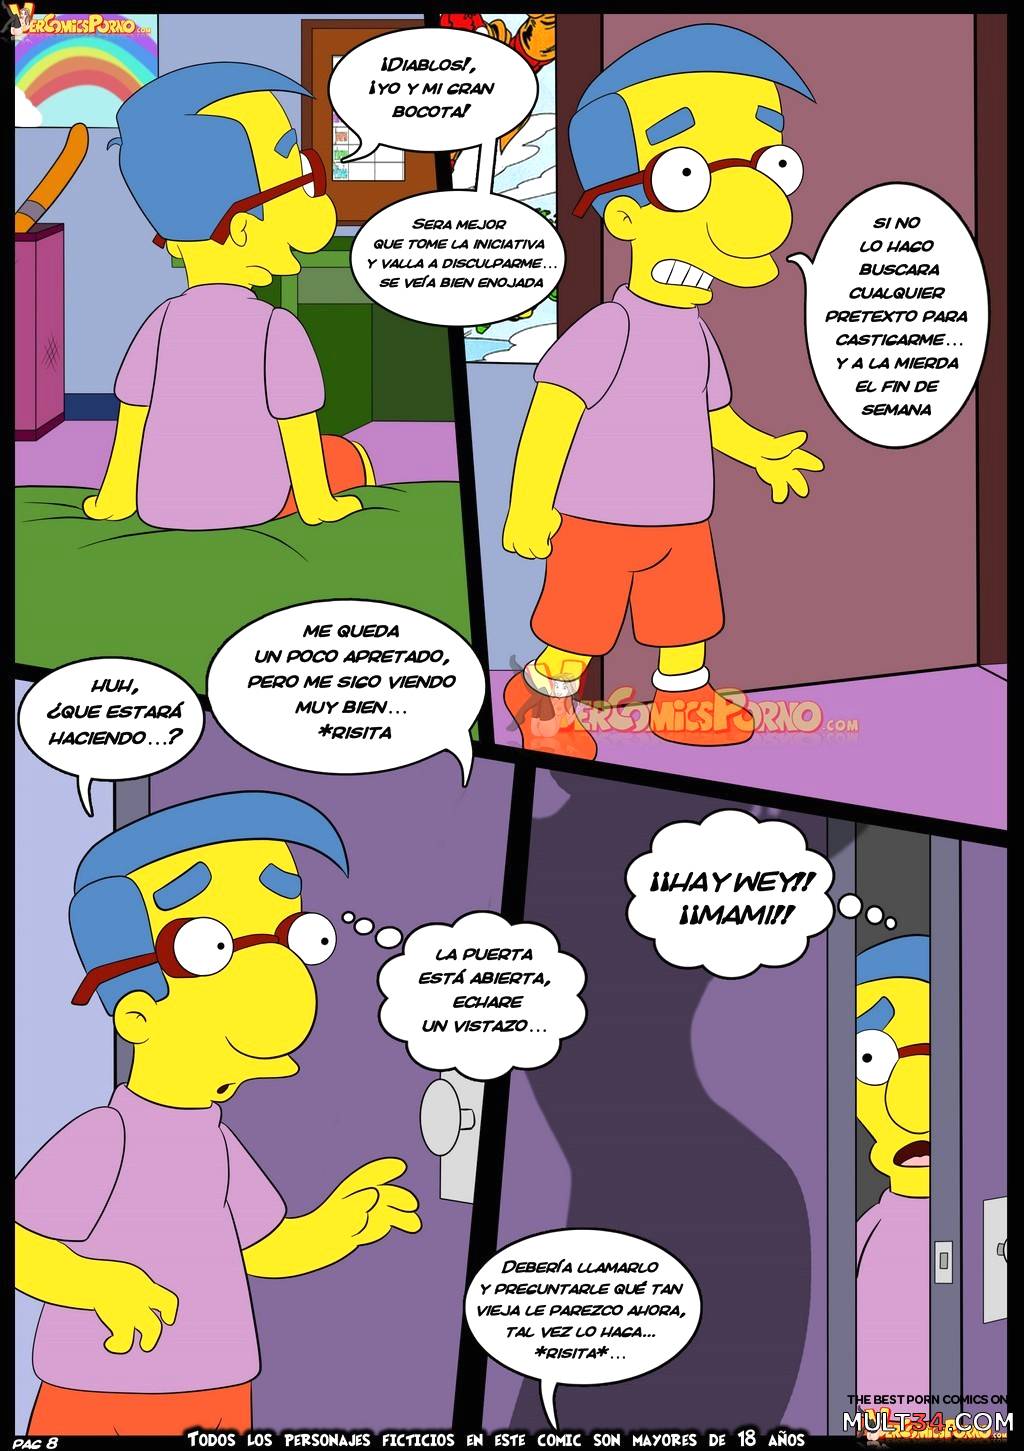 The Simpsons Old Habits 6 page 9.